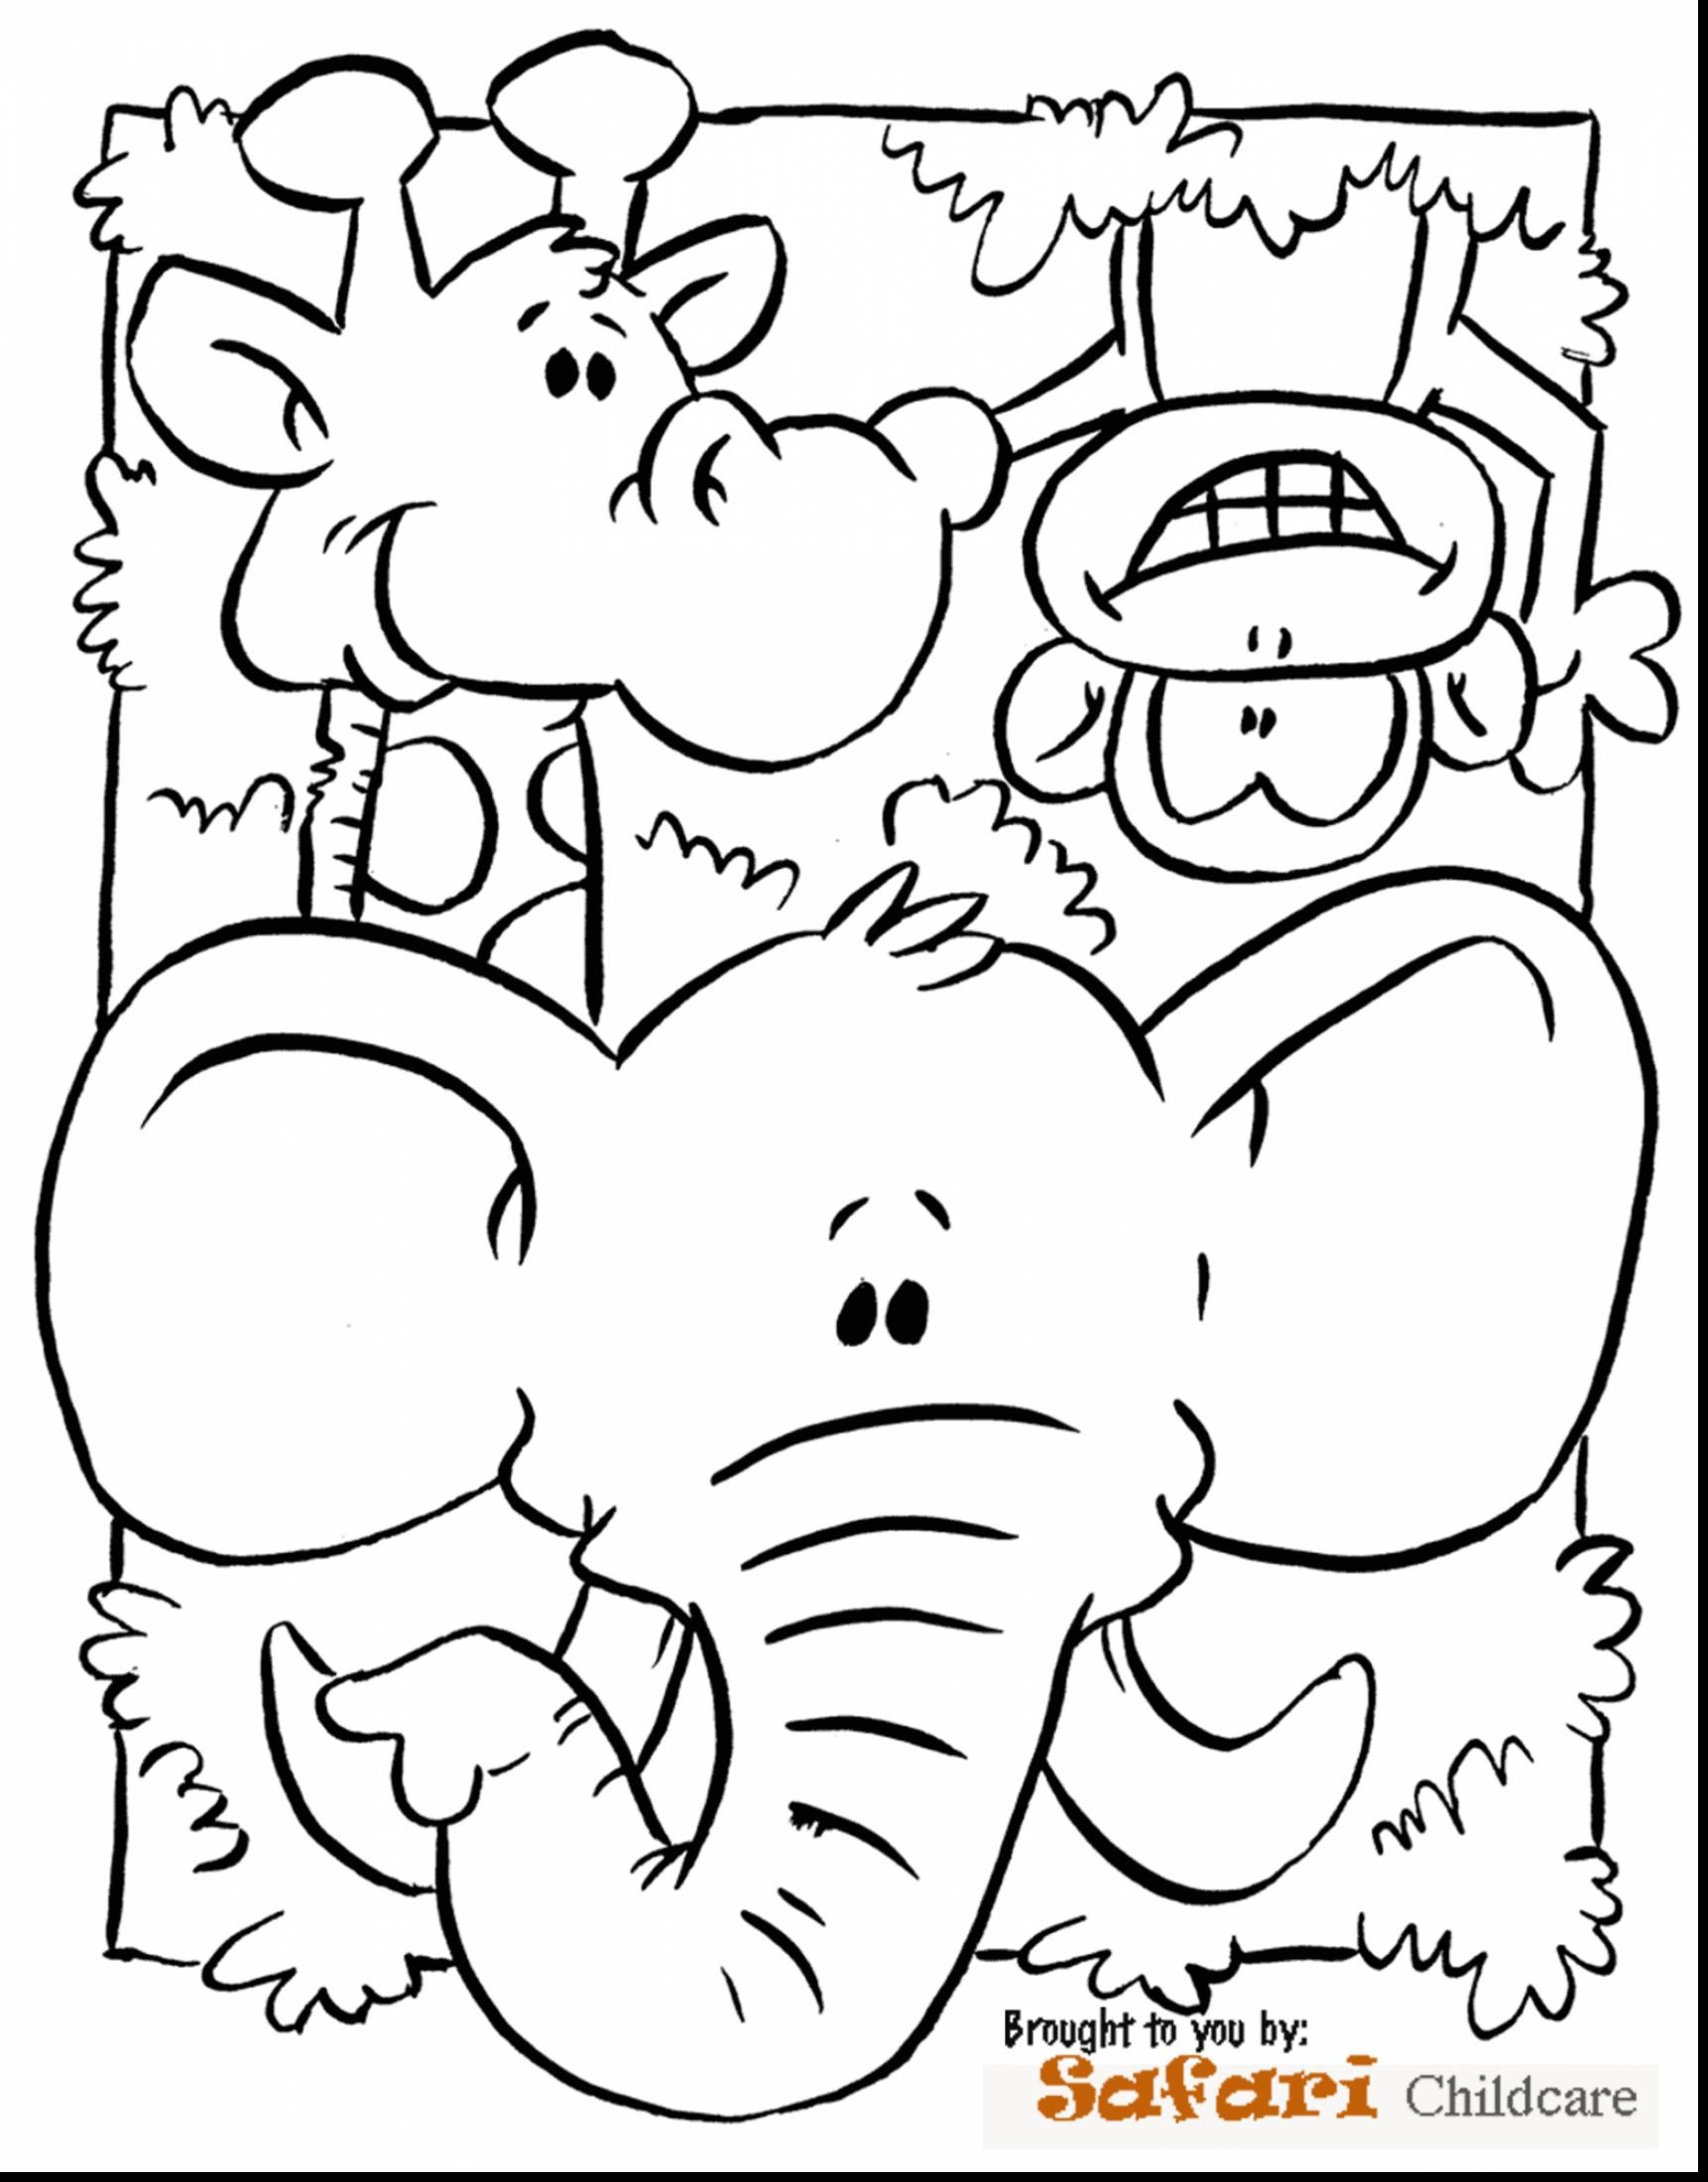 Beautiful Jungle Animals Coloring Pages 33 For Your Free Coloring Book with Jungle Animals Coloring Pages